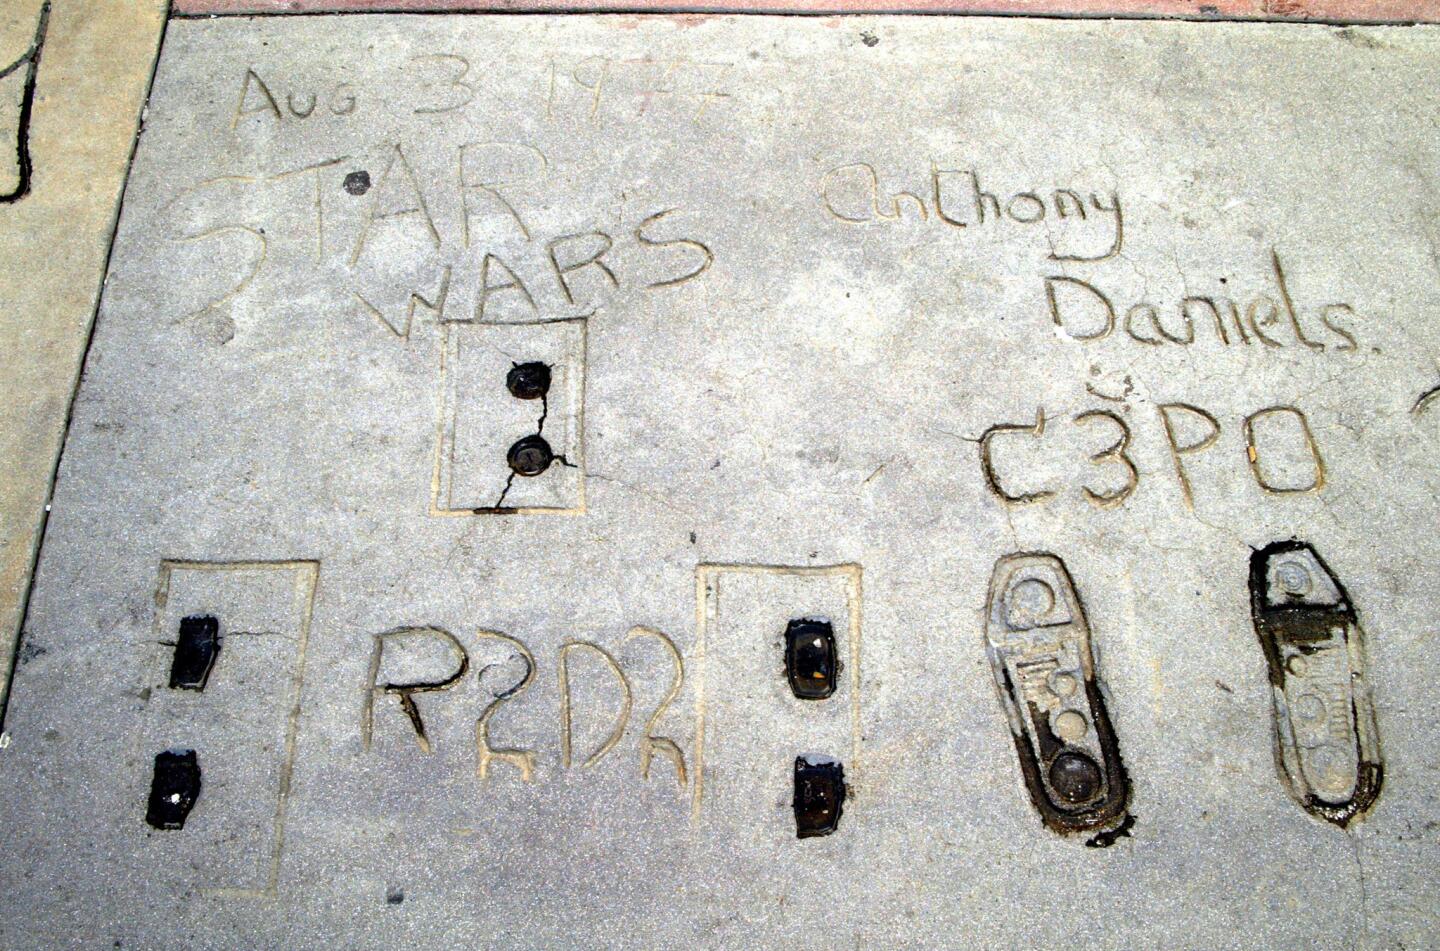 The prints of "Star Wars" droids R2-D2 (played by Kenny Baker) and C-3PO (played by Anthony Daniels) are seen outside Grauman's Chinese Theatre on March 16, 2003, in Hollywood.